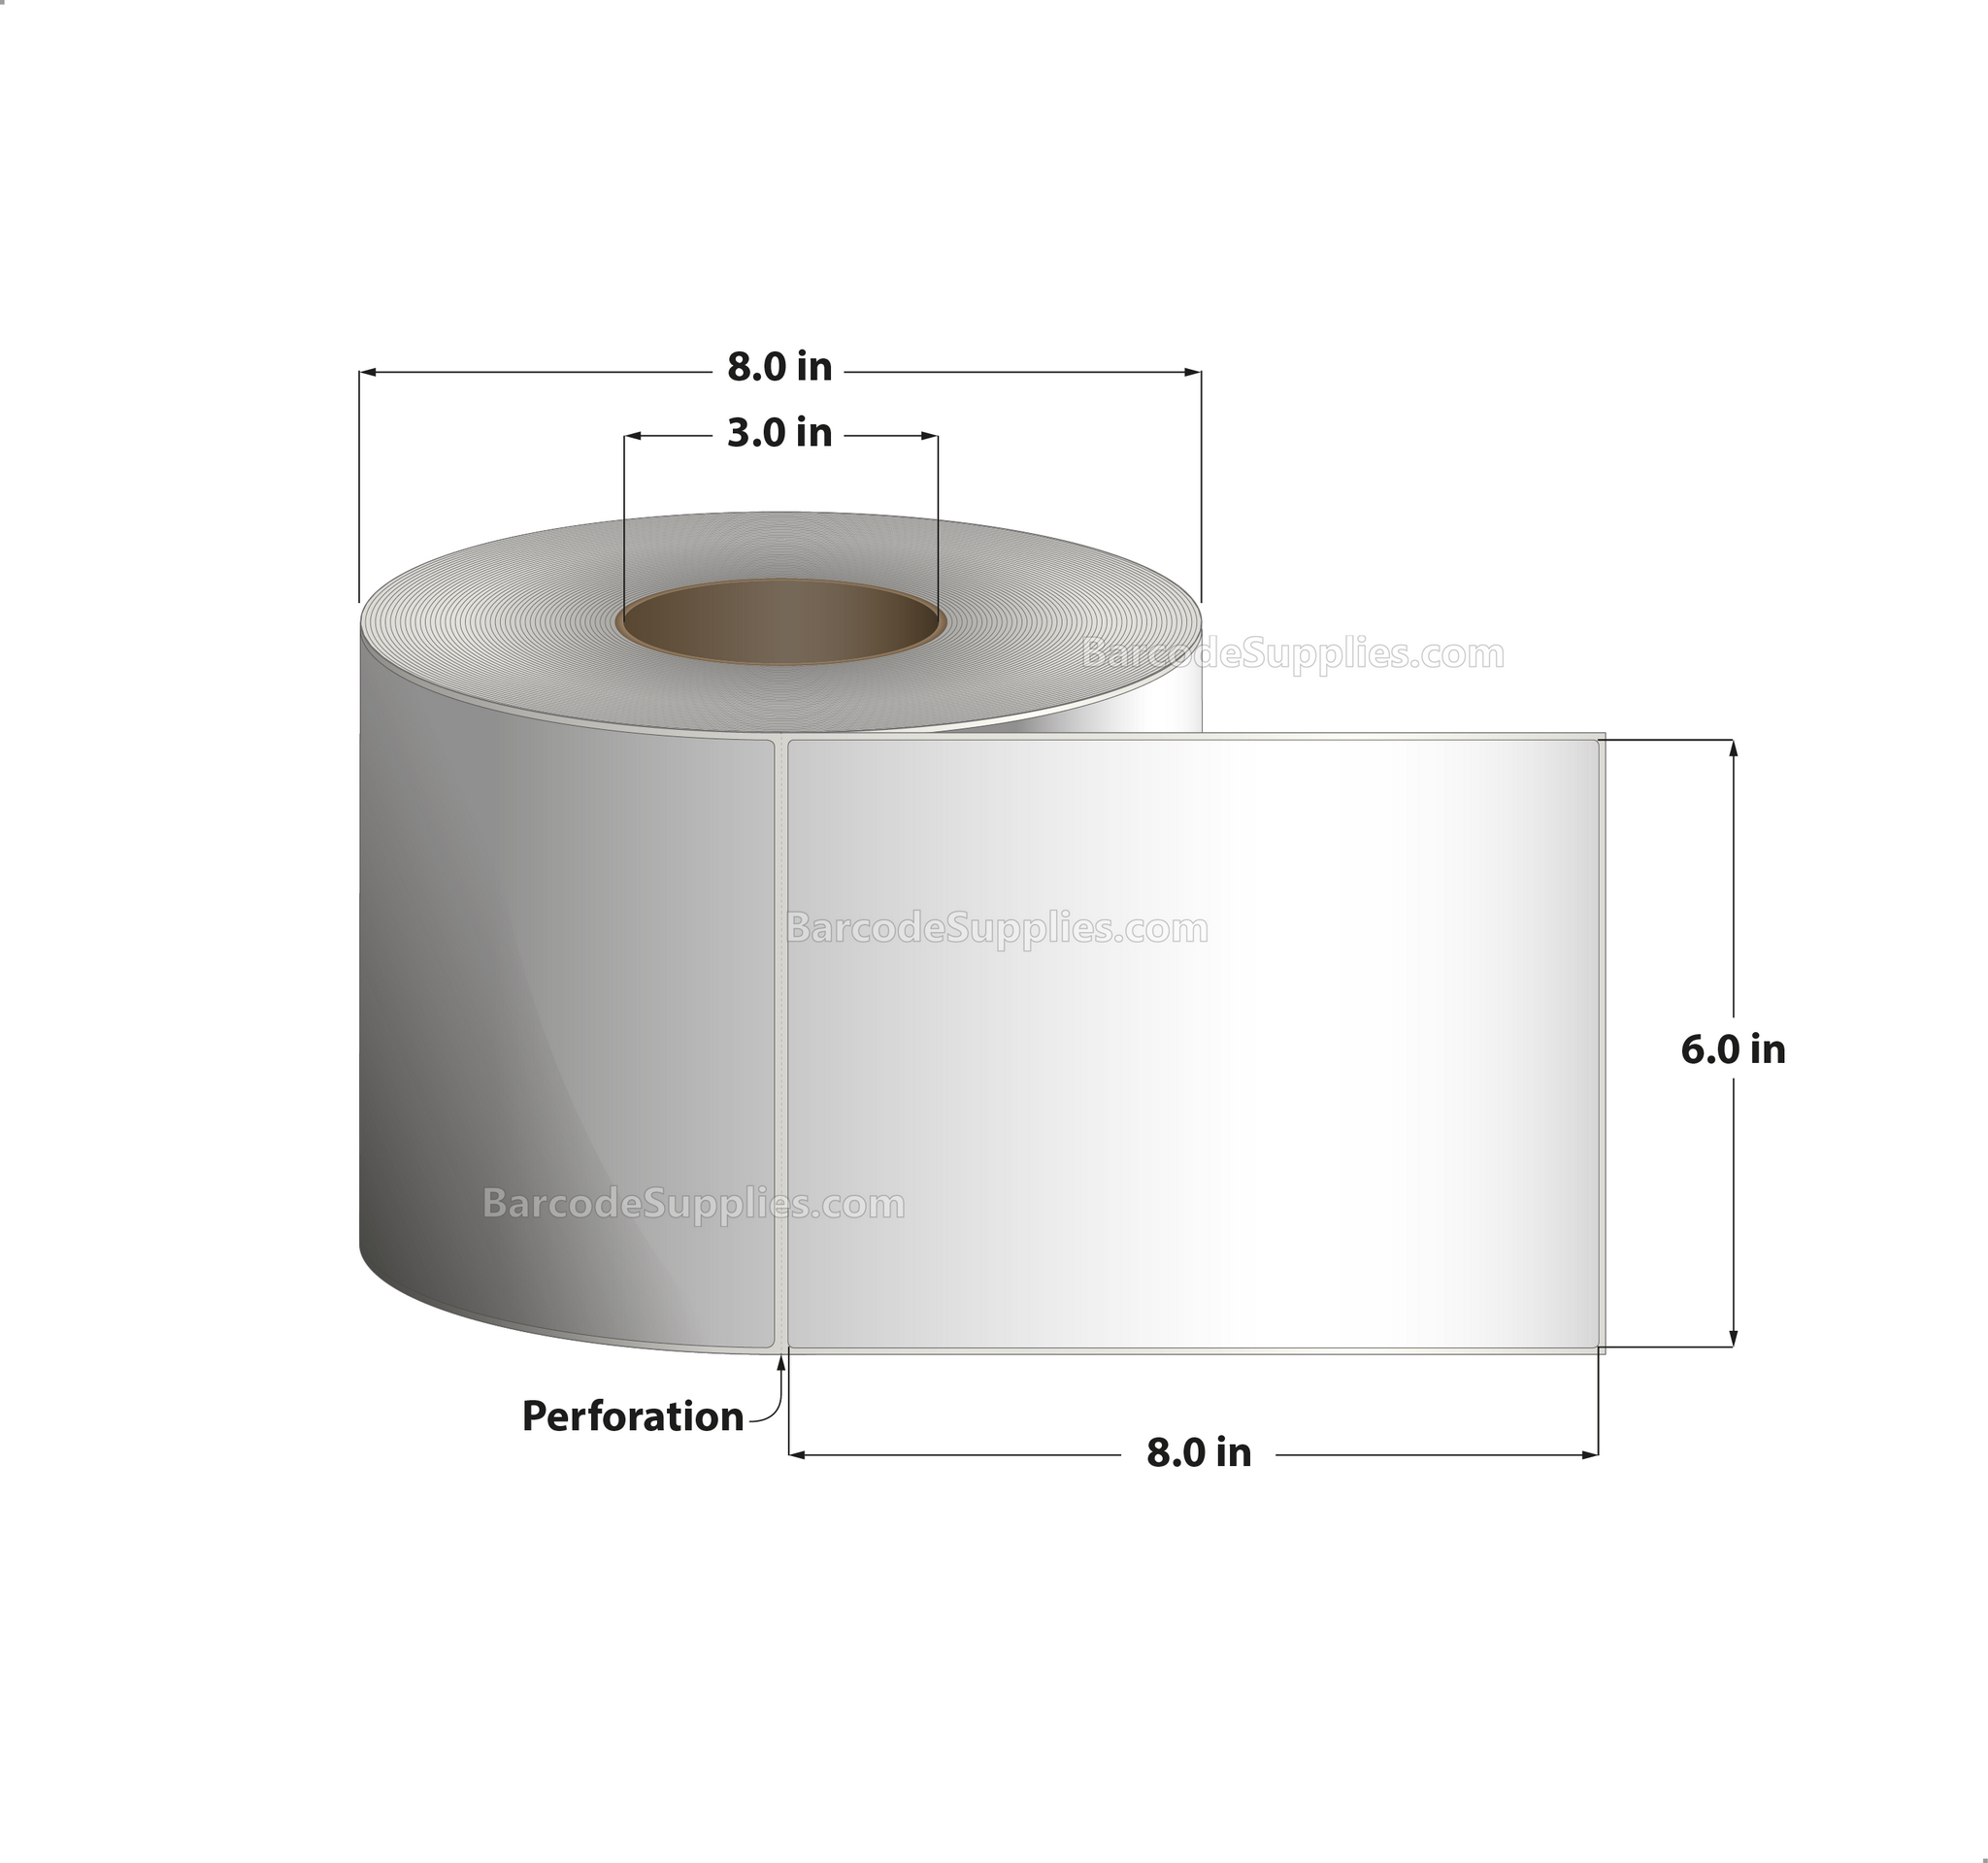 6 x 8 Thermal Transfer White Labels With Permanent Adhesive - Perforated - 750 Labels Per Roll - Carton Of 4 Rolls - 3000 Labels Total - MPN: RT-6-8-750-3